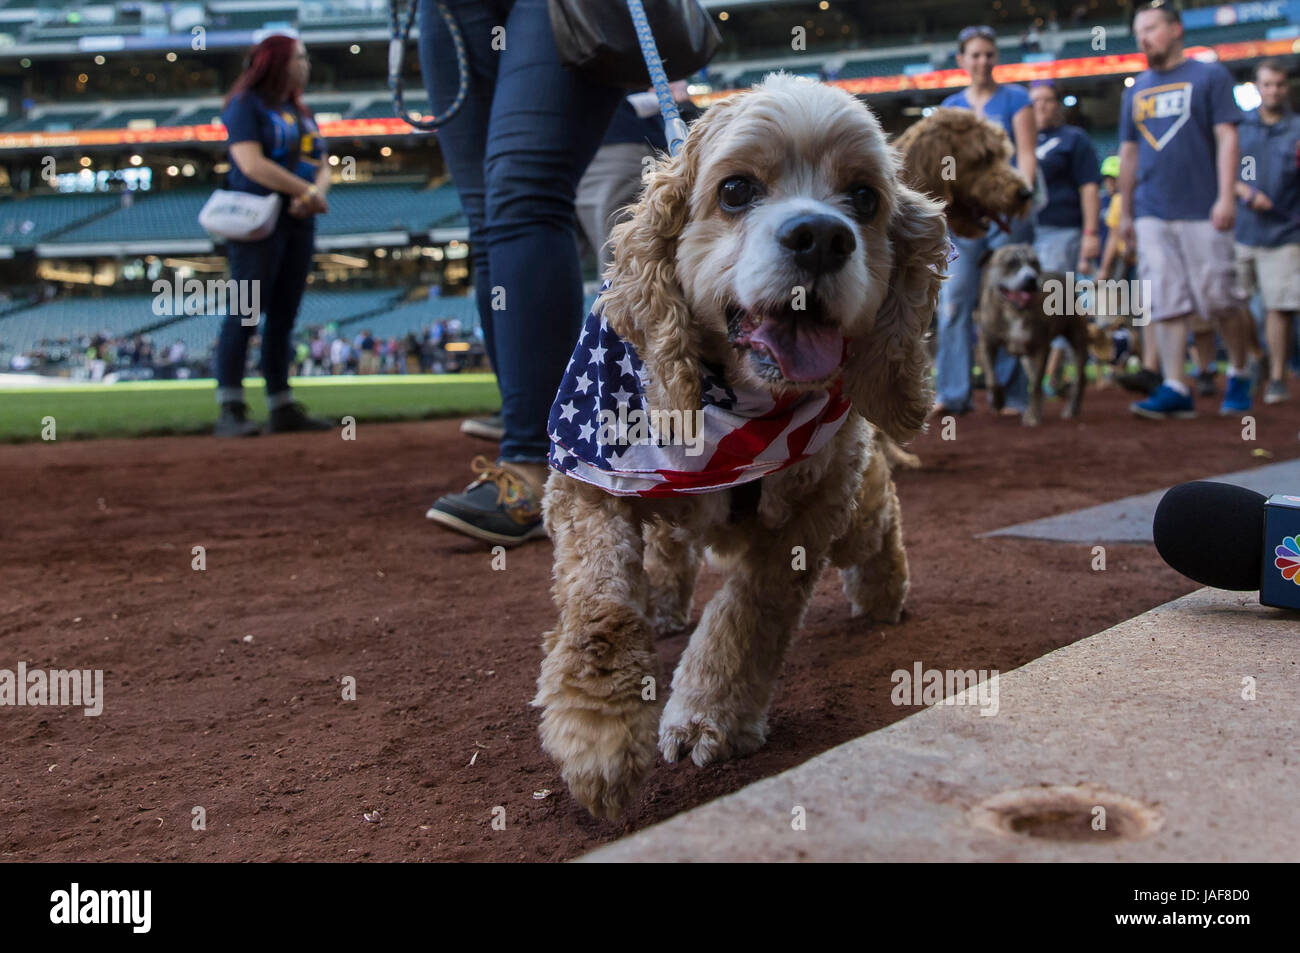 Milwaukee, WI, USA. 6th June, 2017. Bring your dog to the ballpark day at Miller Park. Fans had the opportunity to walk their dogs around the field before the Major League Baseball game between the Milwaukee Brewers and the San Francisco Giants at Miller Park in Milwaukee, WI. John Fisher/CSM/Alamy Live News Stock Photo